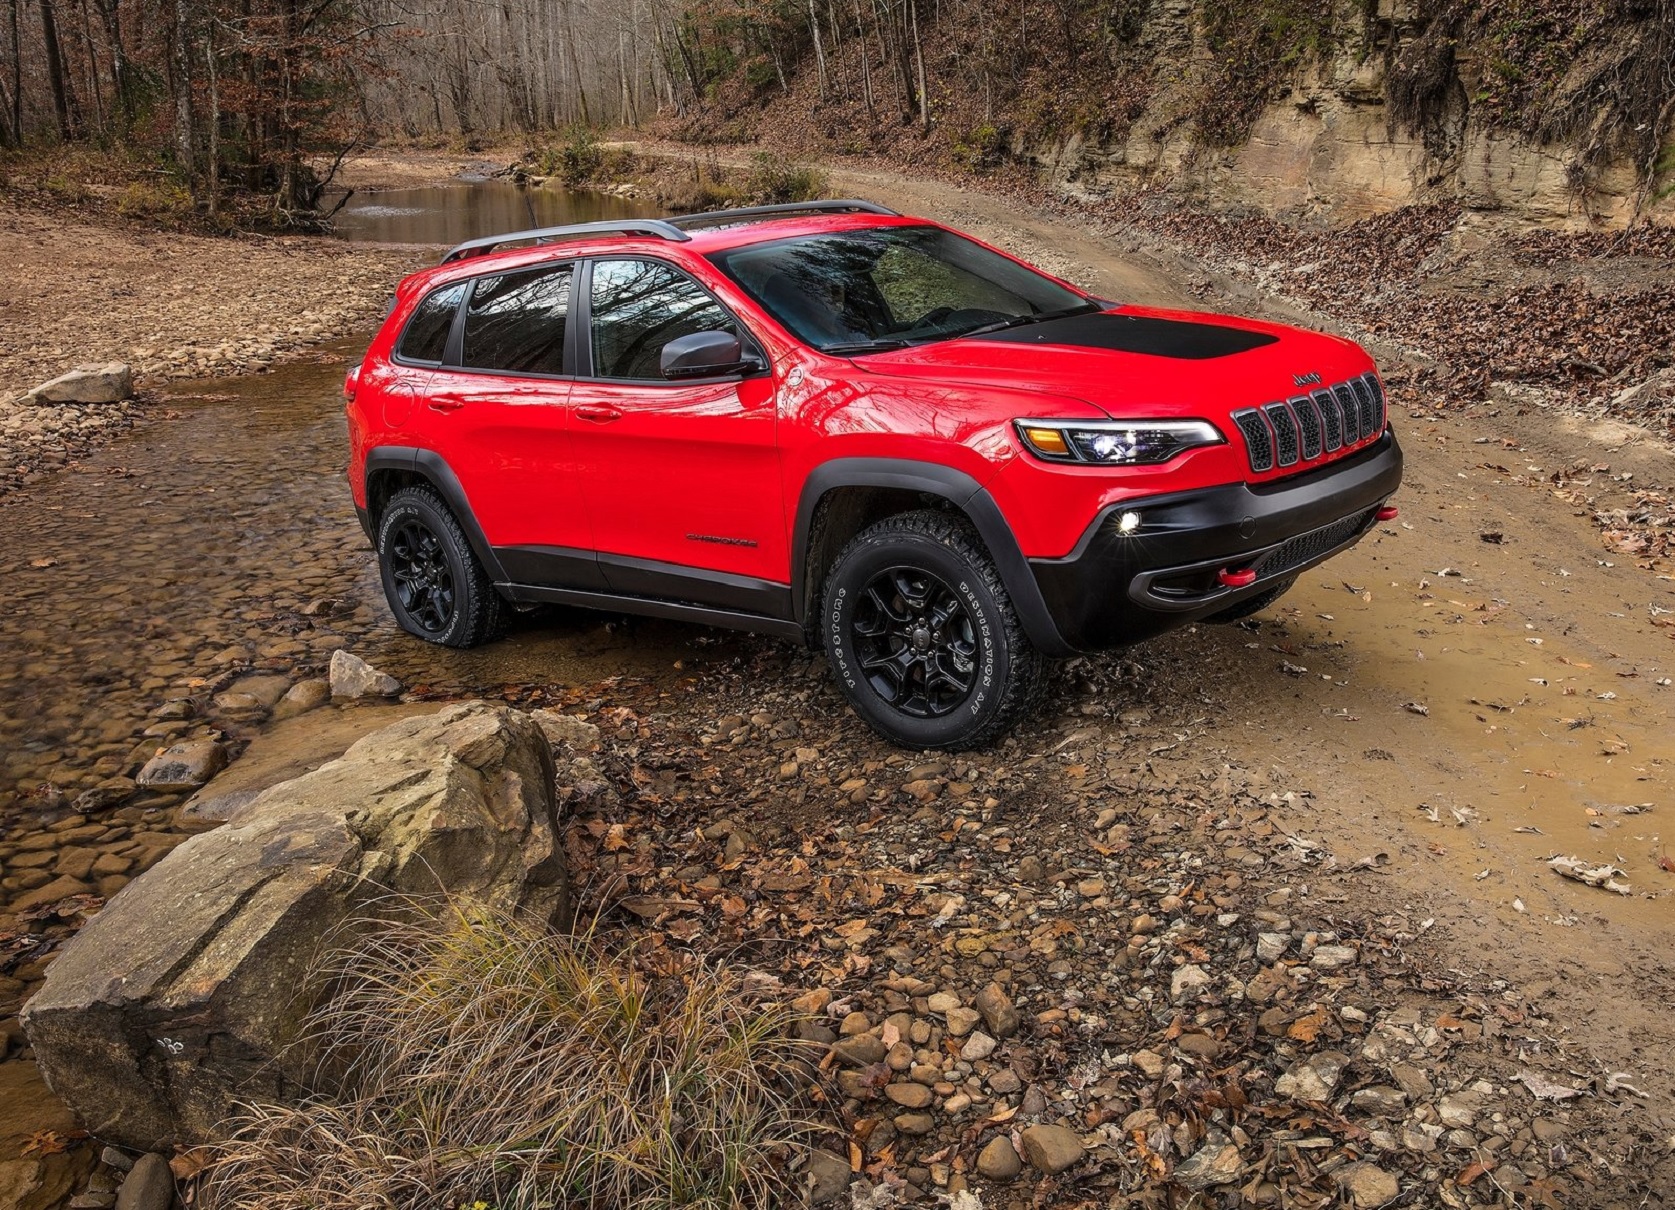 A red-and-black 2020 Jeep Cherokee Trailhawk on a muddy off-road trail